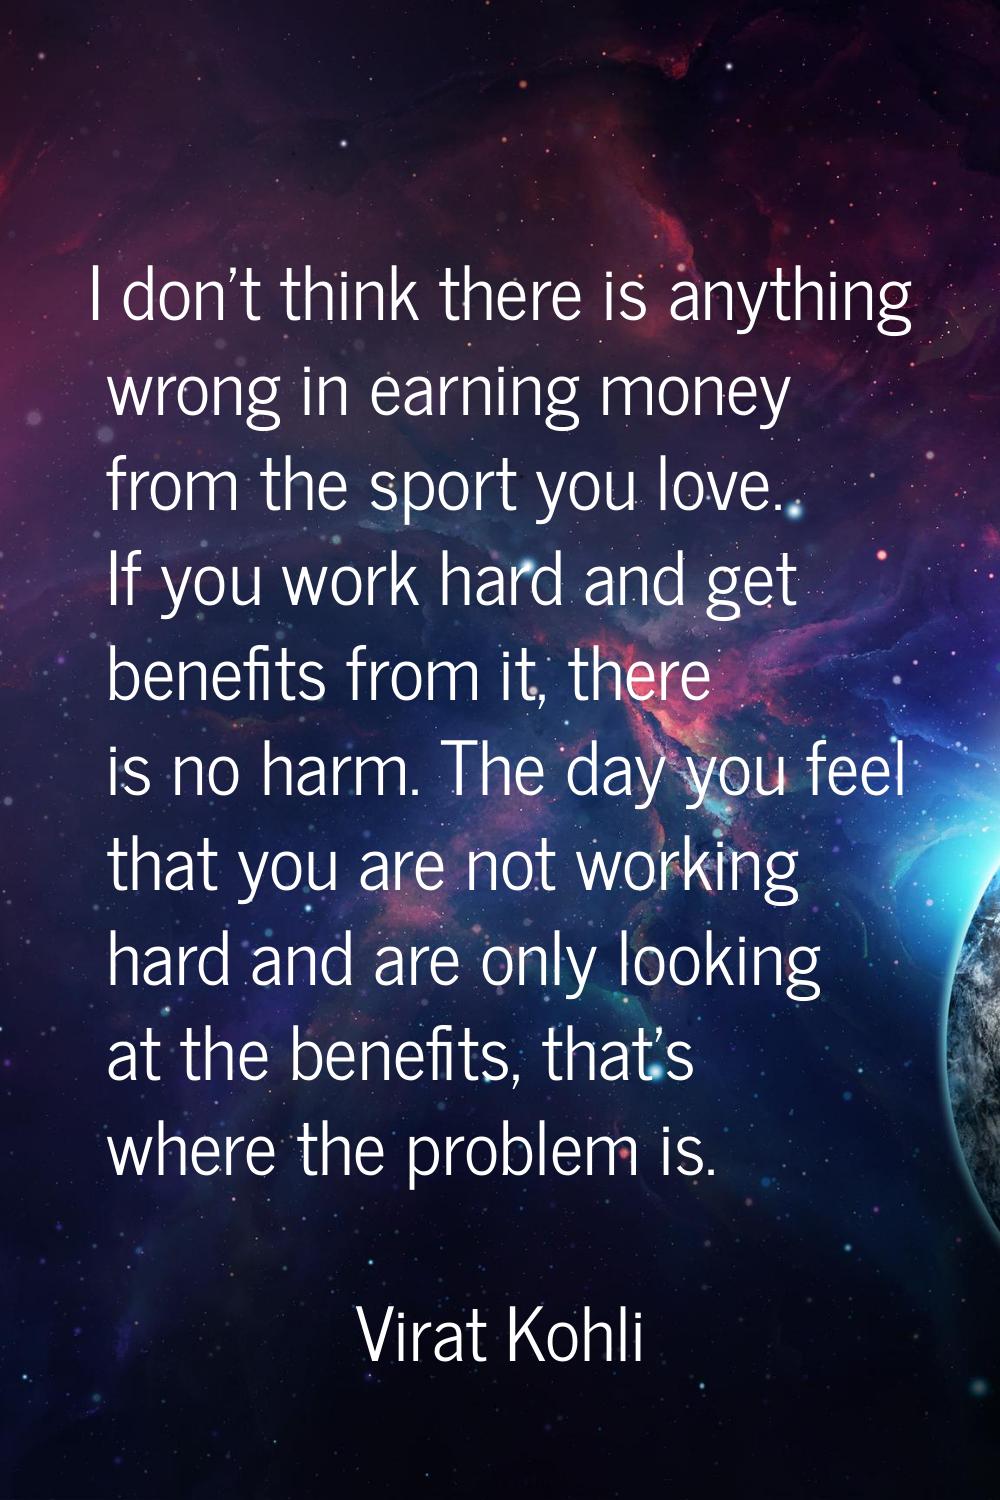 I don't think there is anything wrong in earning money from the sport you love. If you work hard an